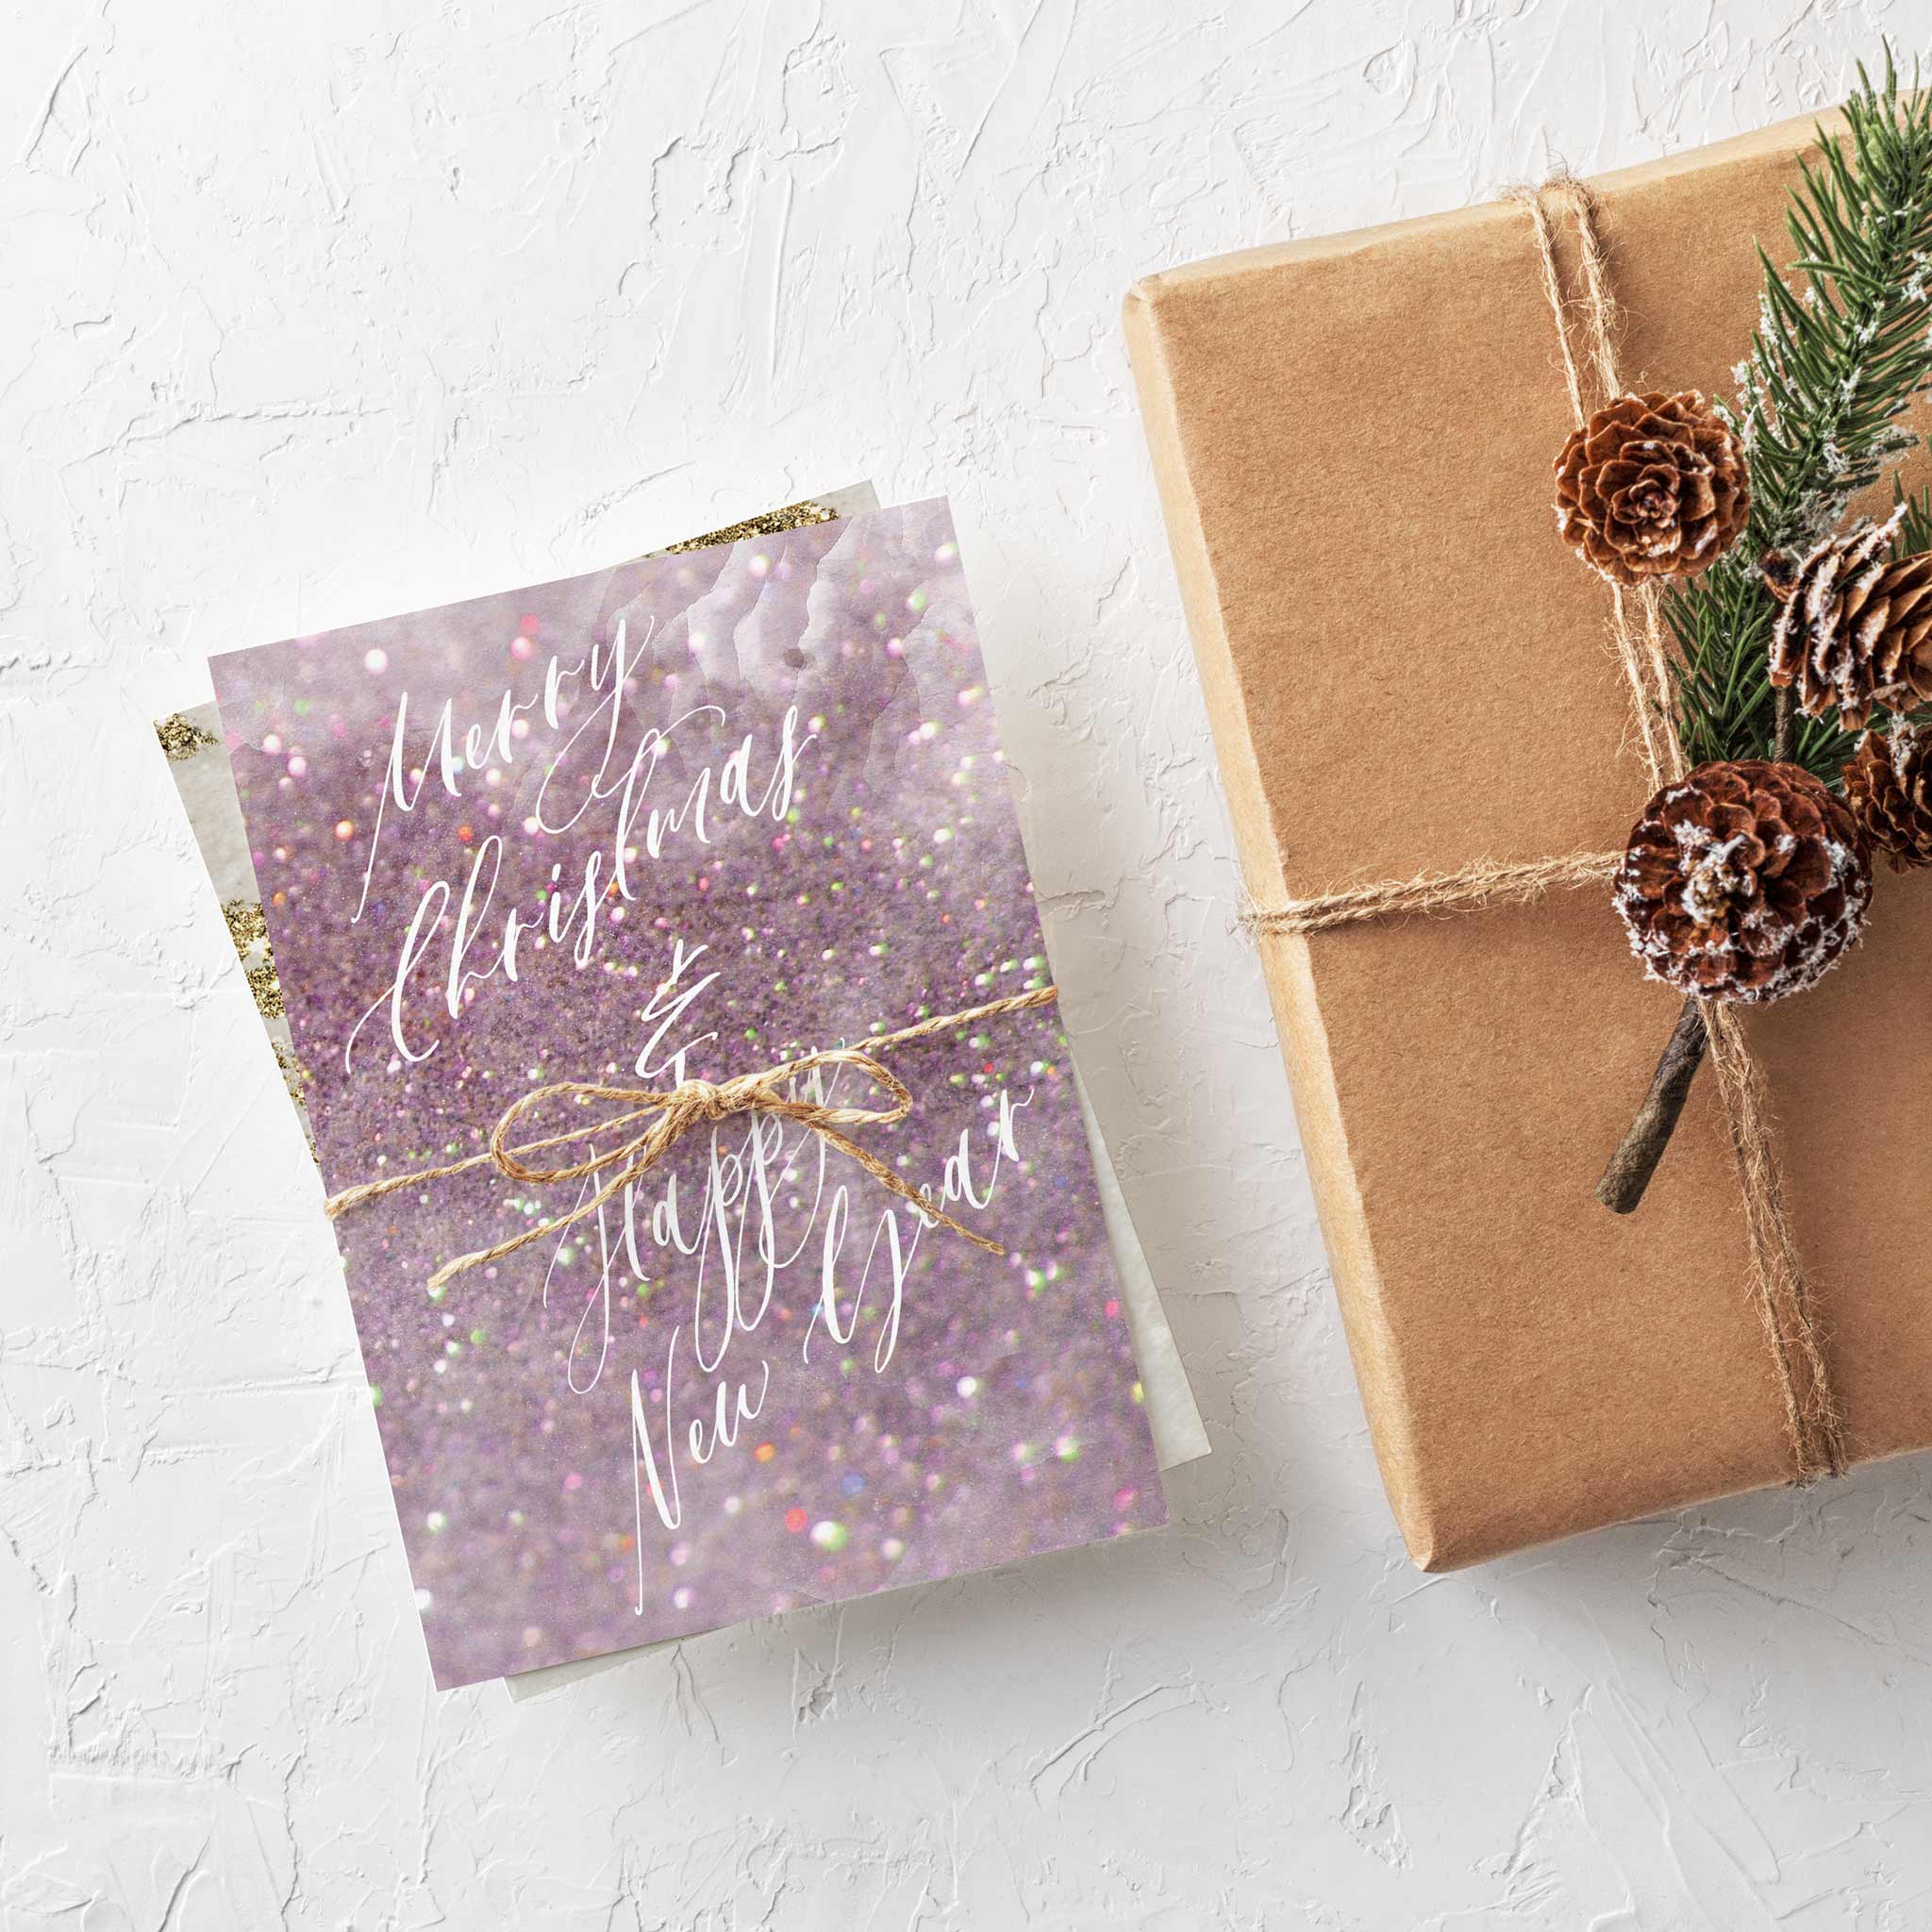 Rose Gold Marble Christmas Cards - 24 Pack Feminine Retro Holiday Cards -  Ritzy Rose